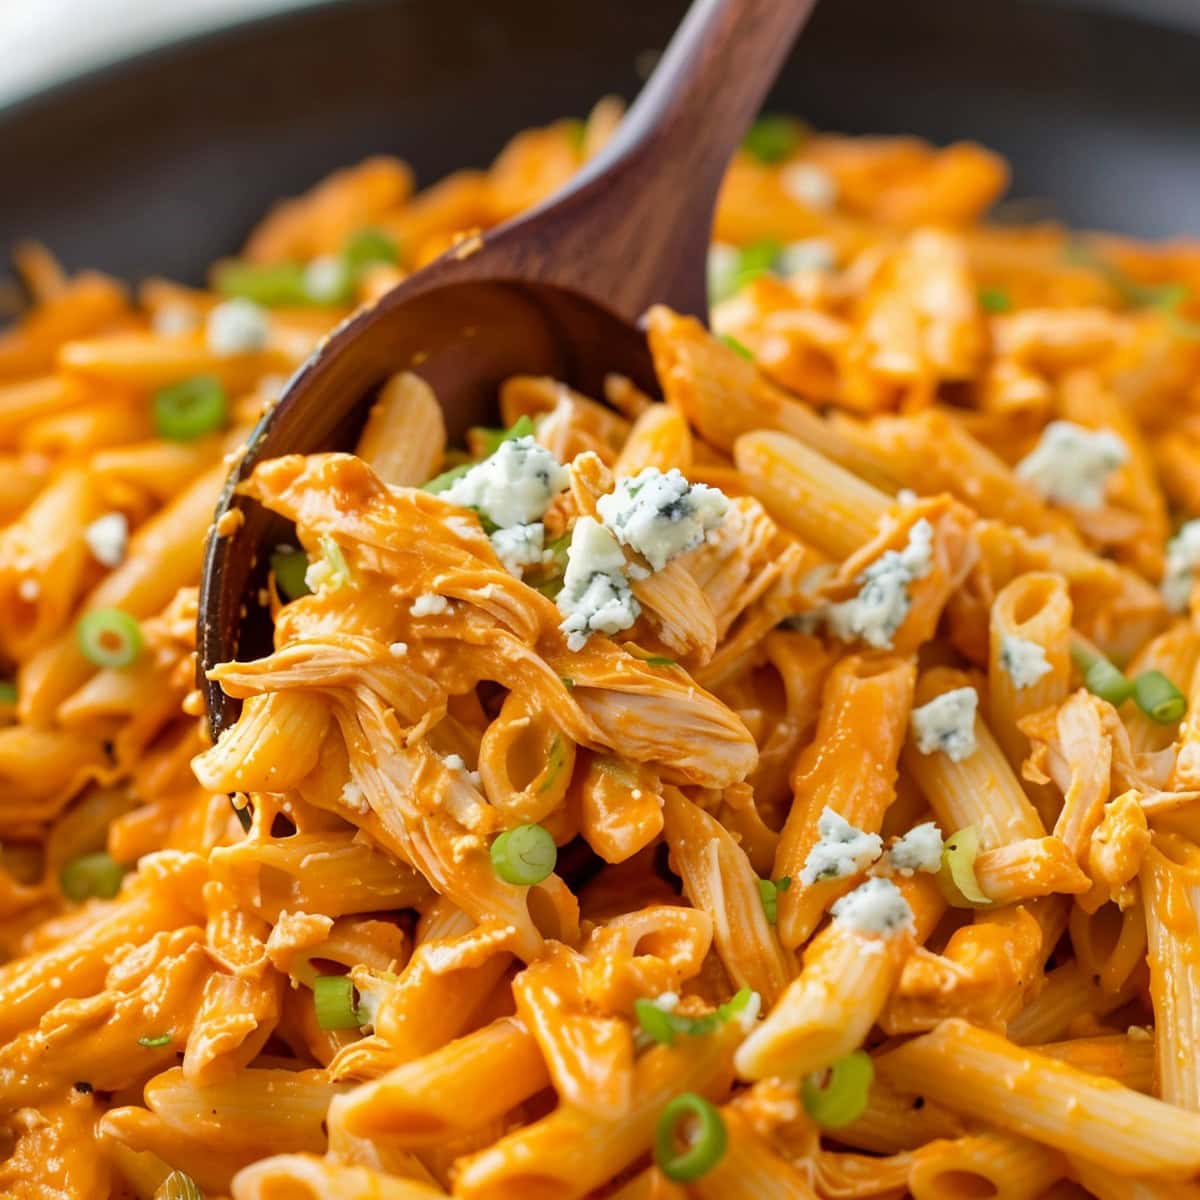 Creamy buffalo-flavored chicken penne pasta with blue cheese and chopped green onions